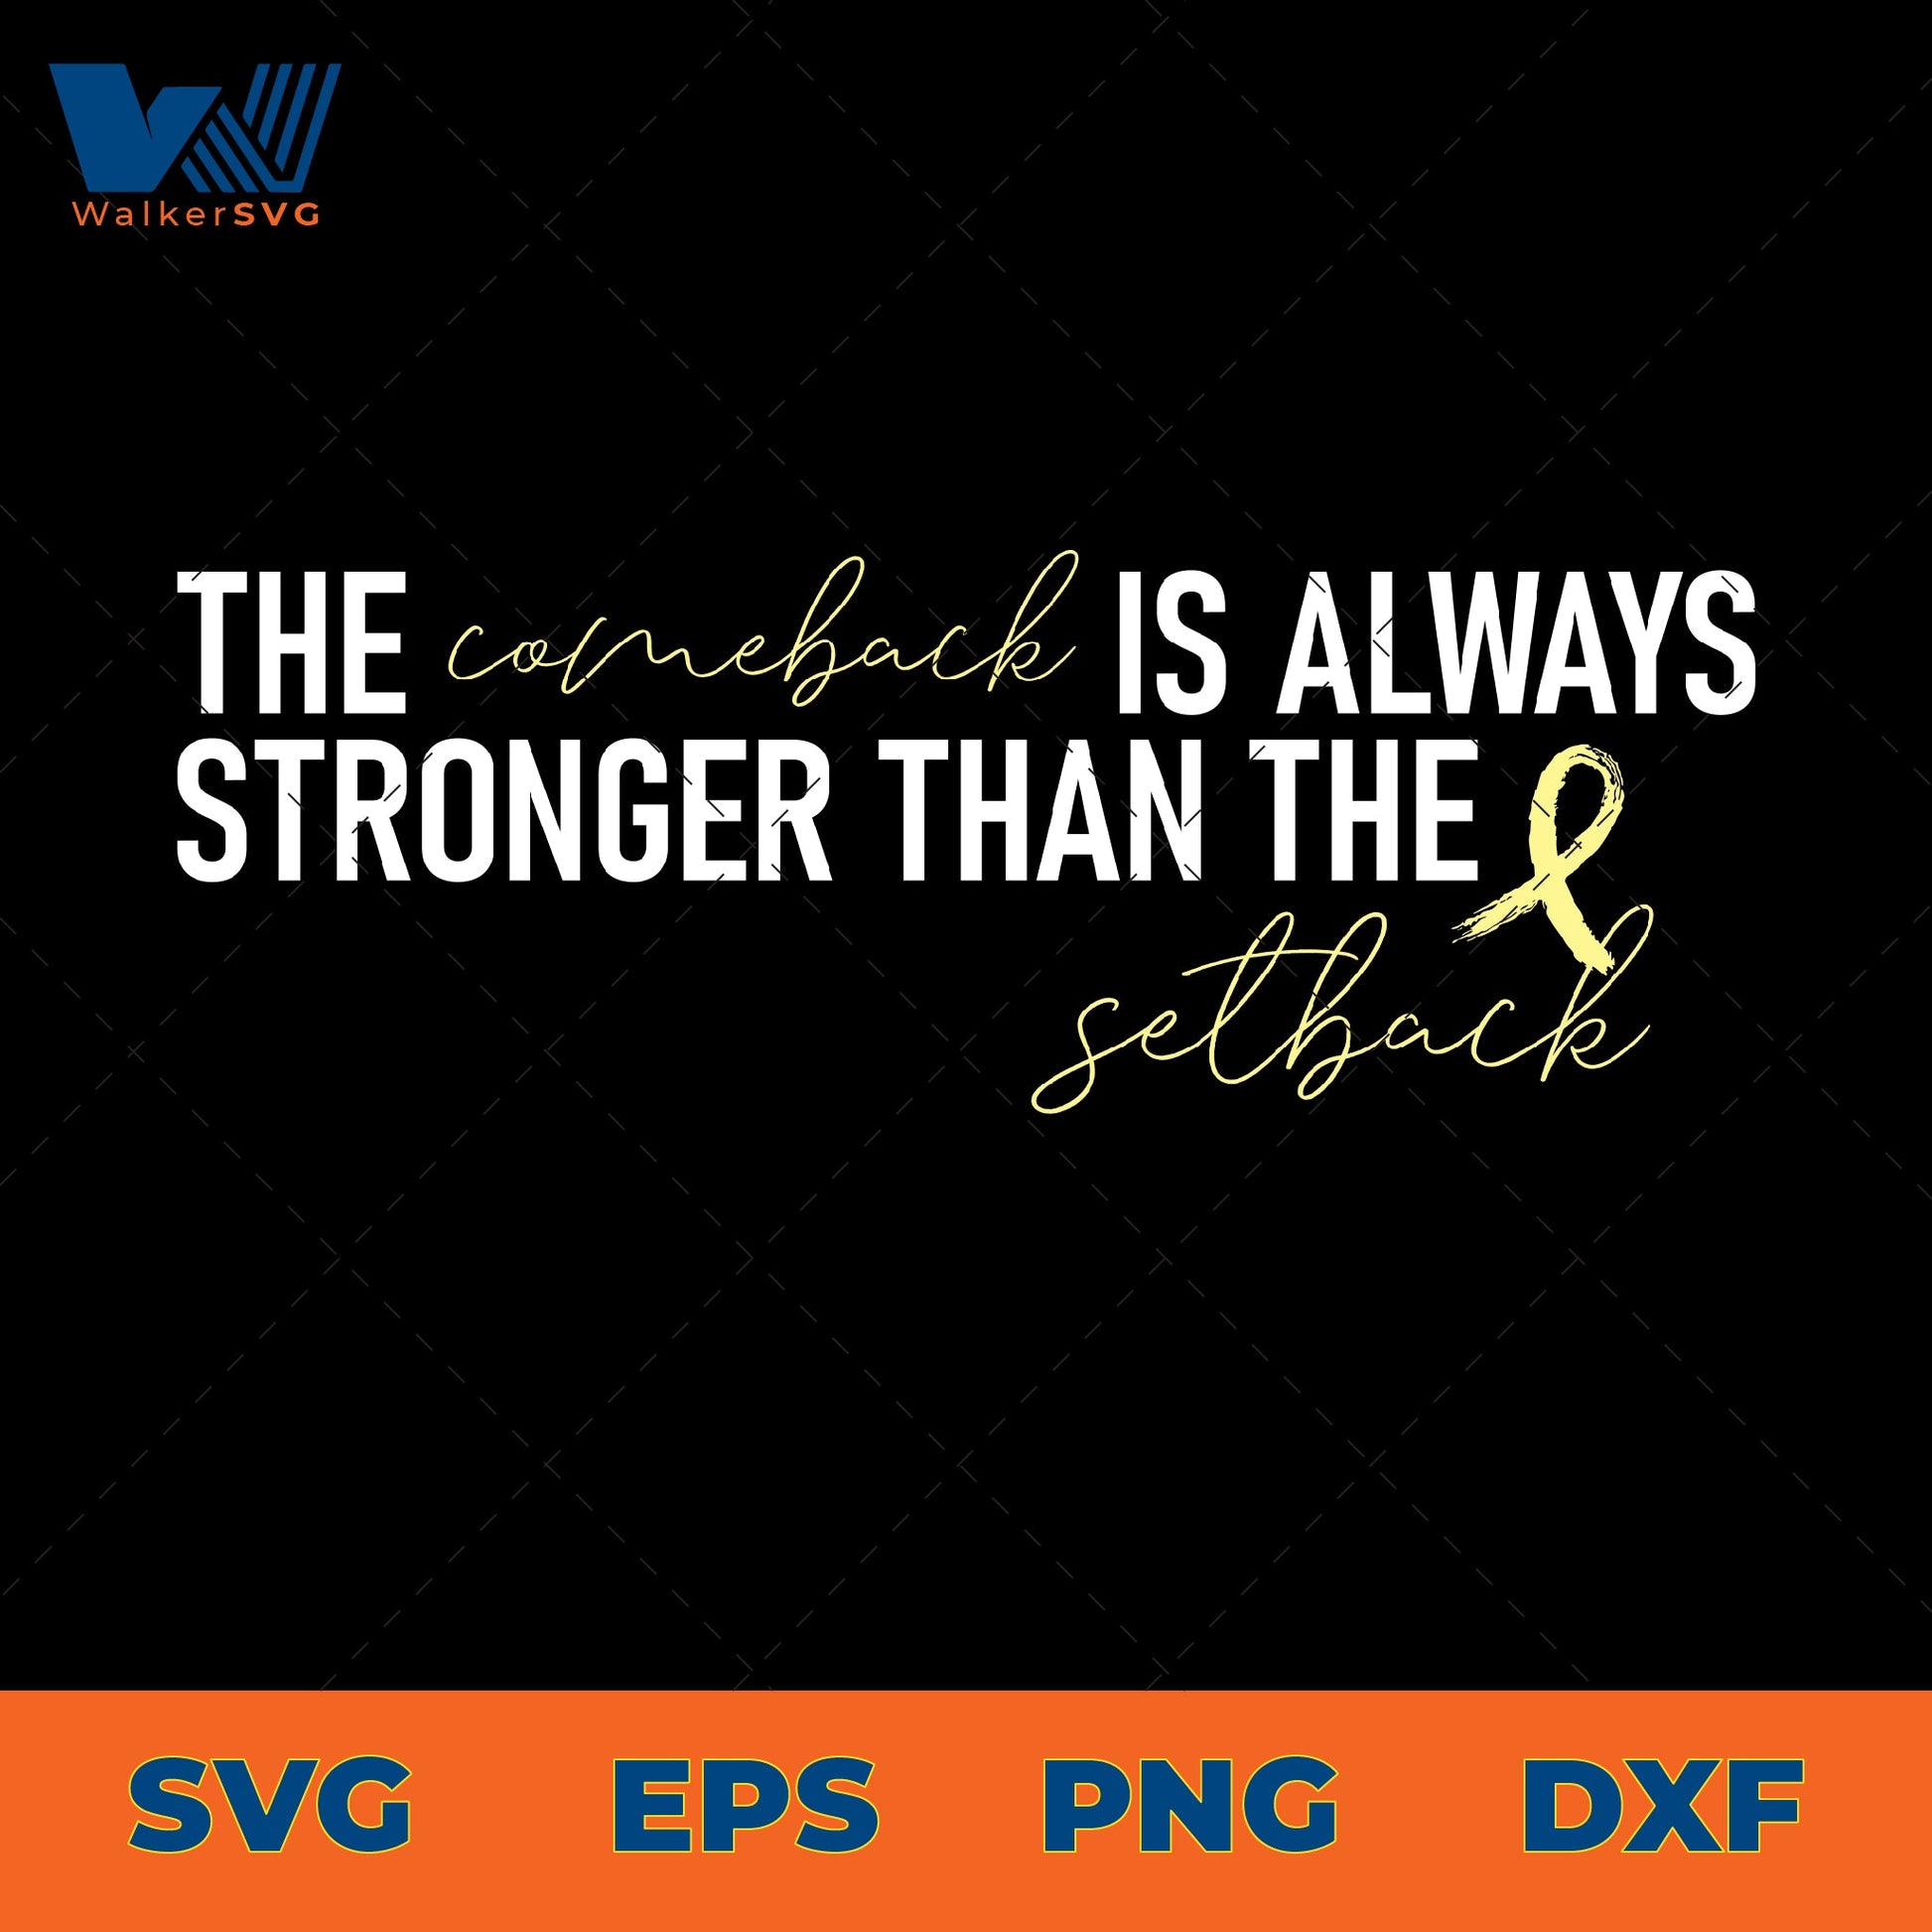 The Comeback Is Always Stronger Than The Setback SVG